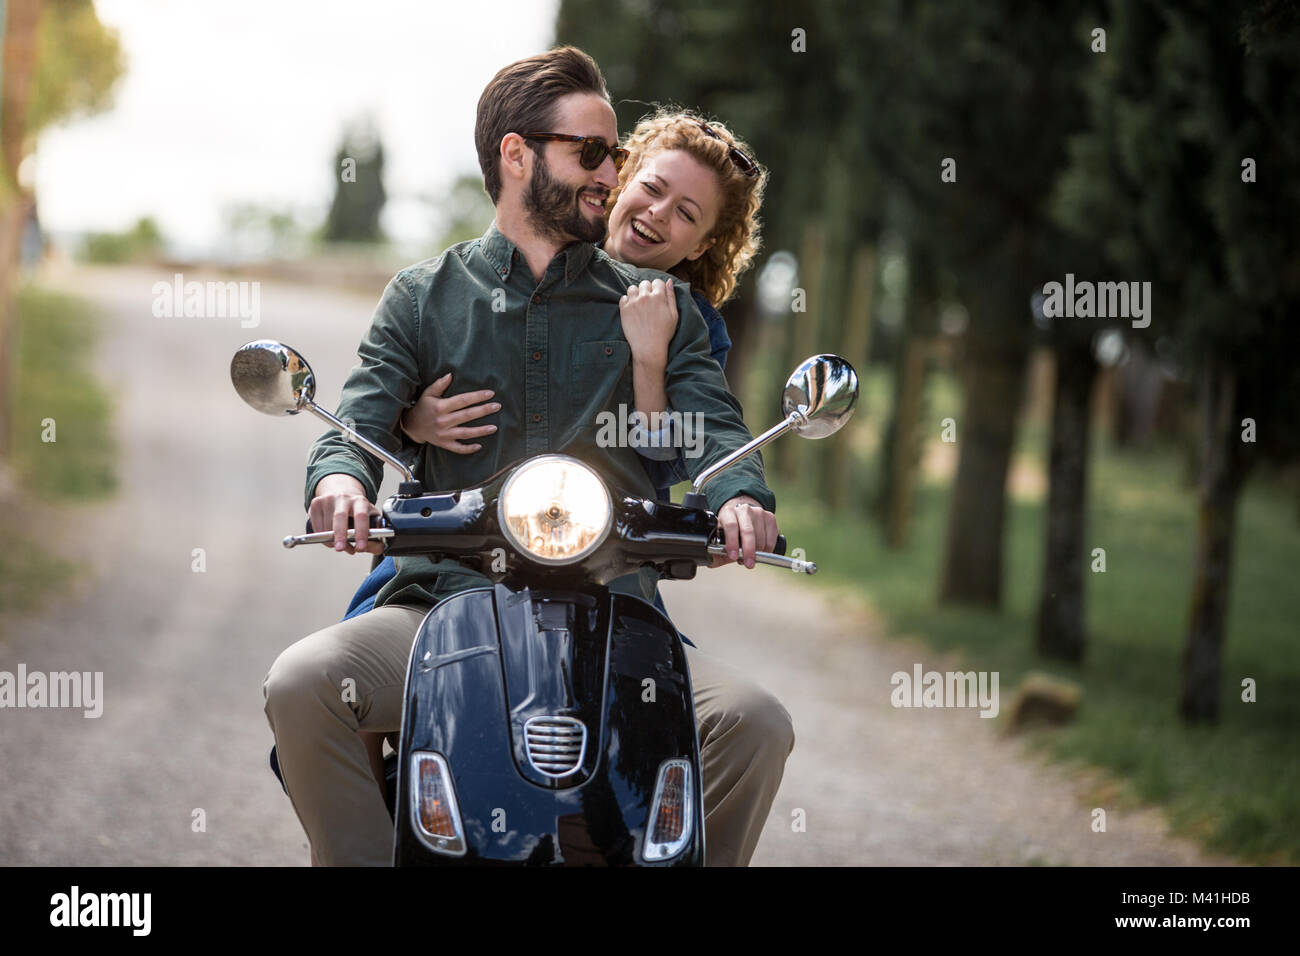 Young couple on motorbike together Stock Photo